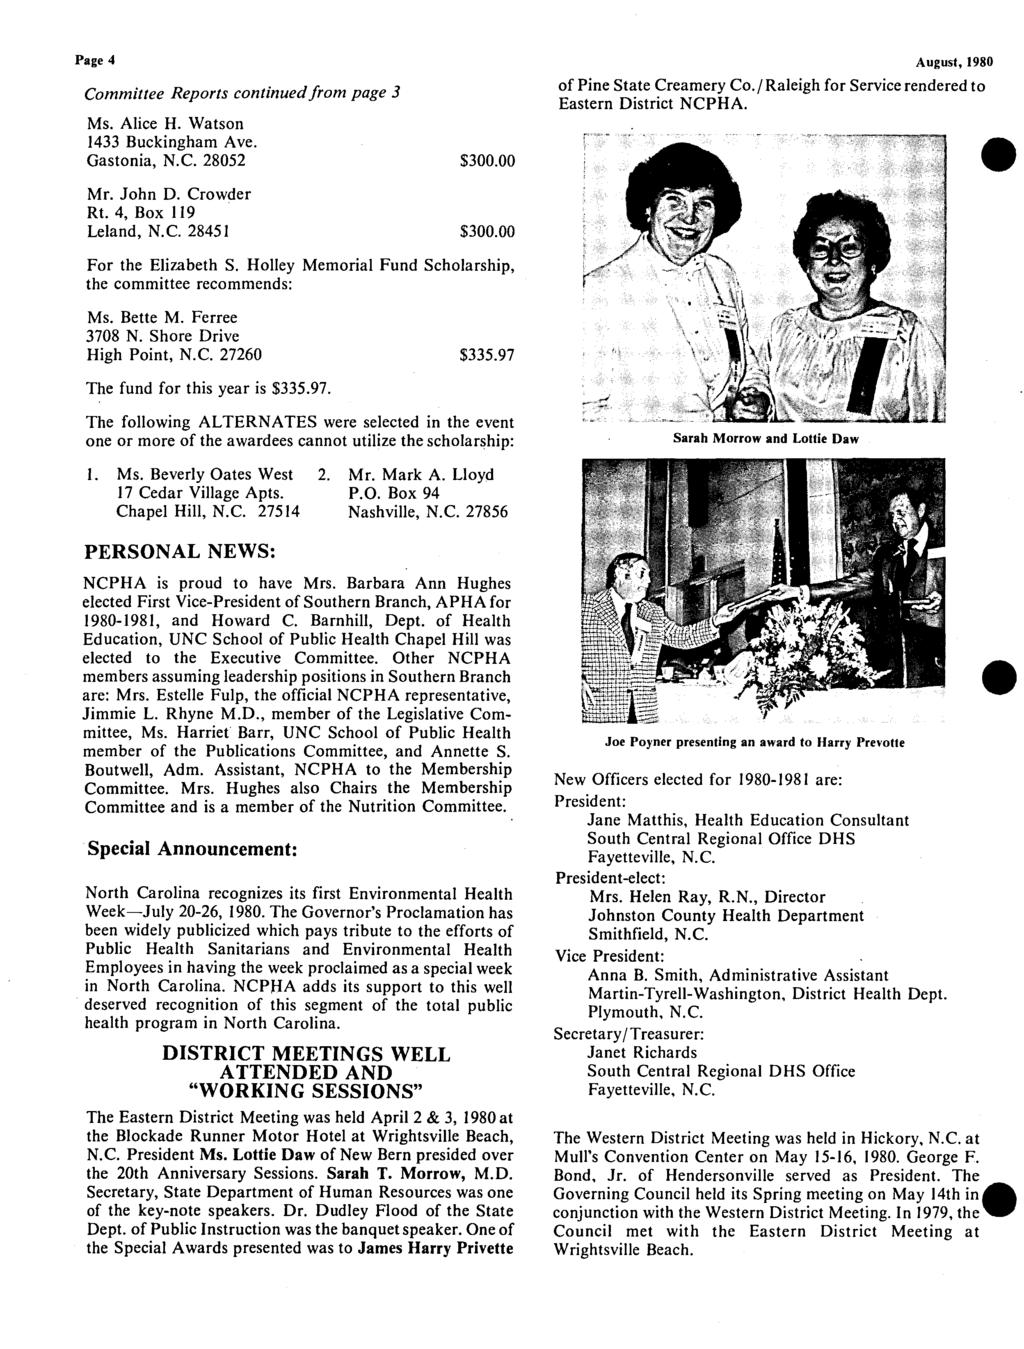 Page 4 Committee Reports continuedfrom page 3 Ms. Alice H. Watson 1433 Buckingham Ave. Gastonia, N. C. 28052 $ 300. 00 August, 1980 of Pine State Creamery Co.